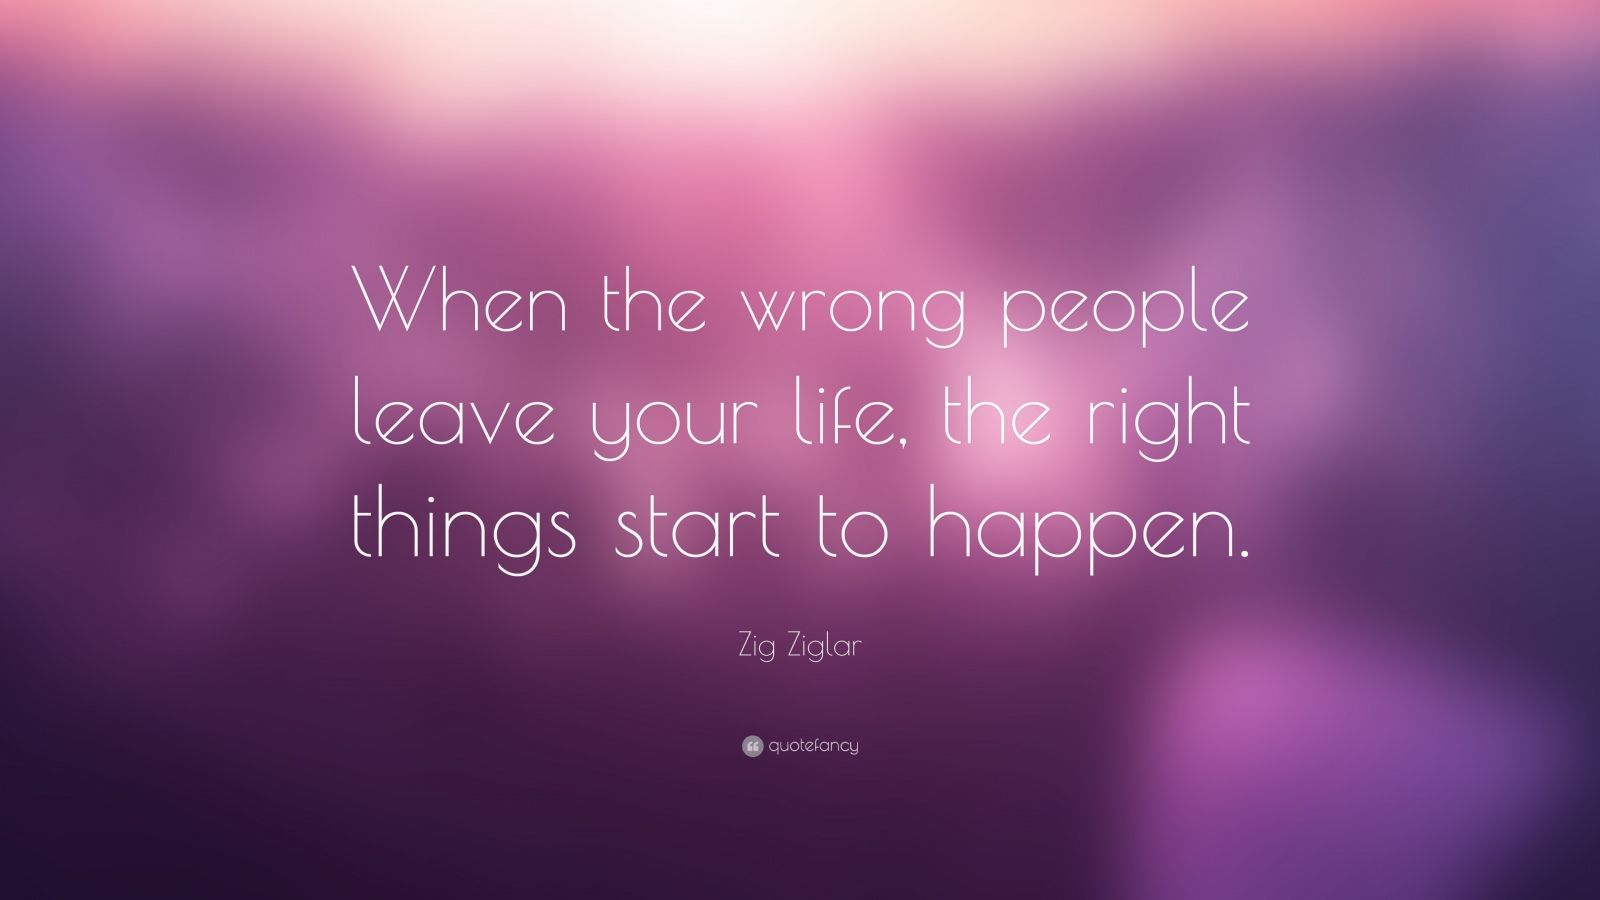 Zig Ziglar Quote: “When the wrong people leave your life, the right ...